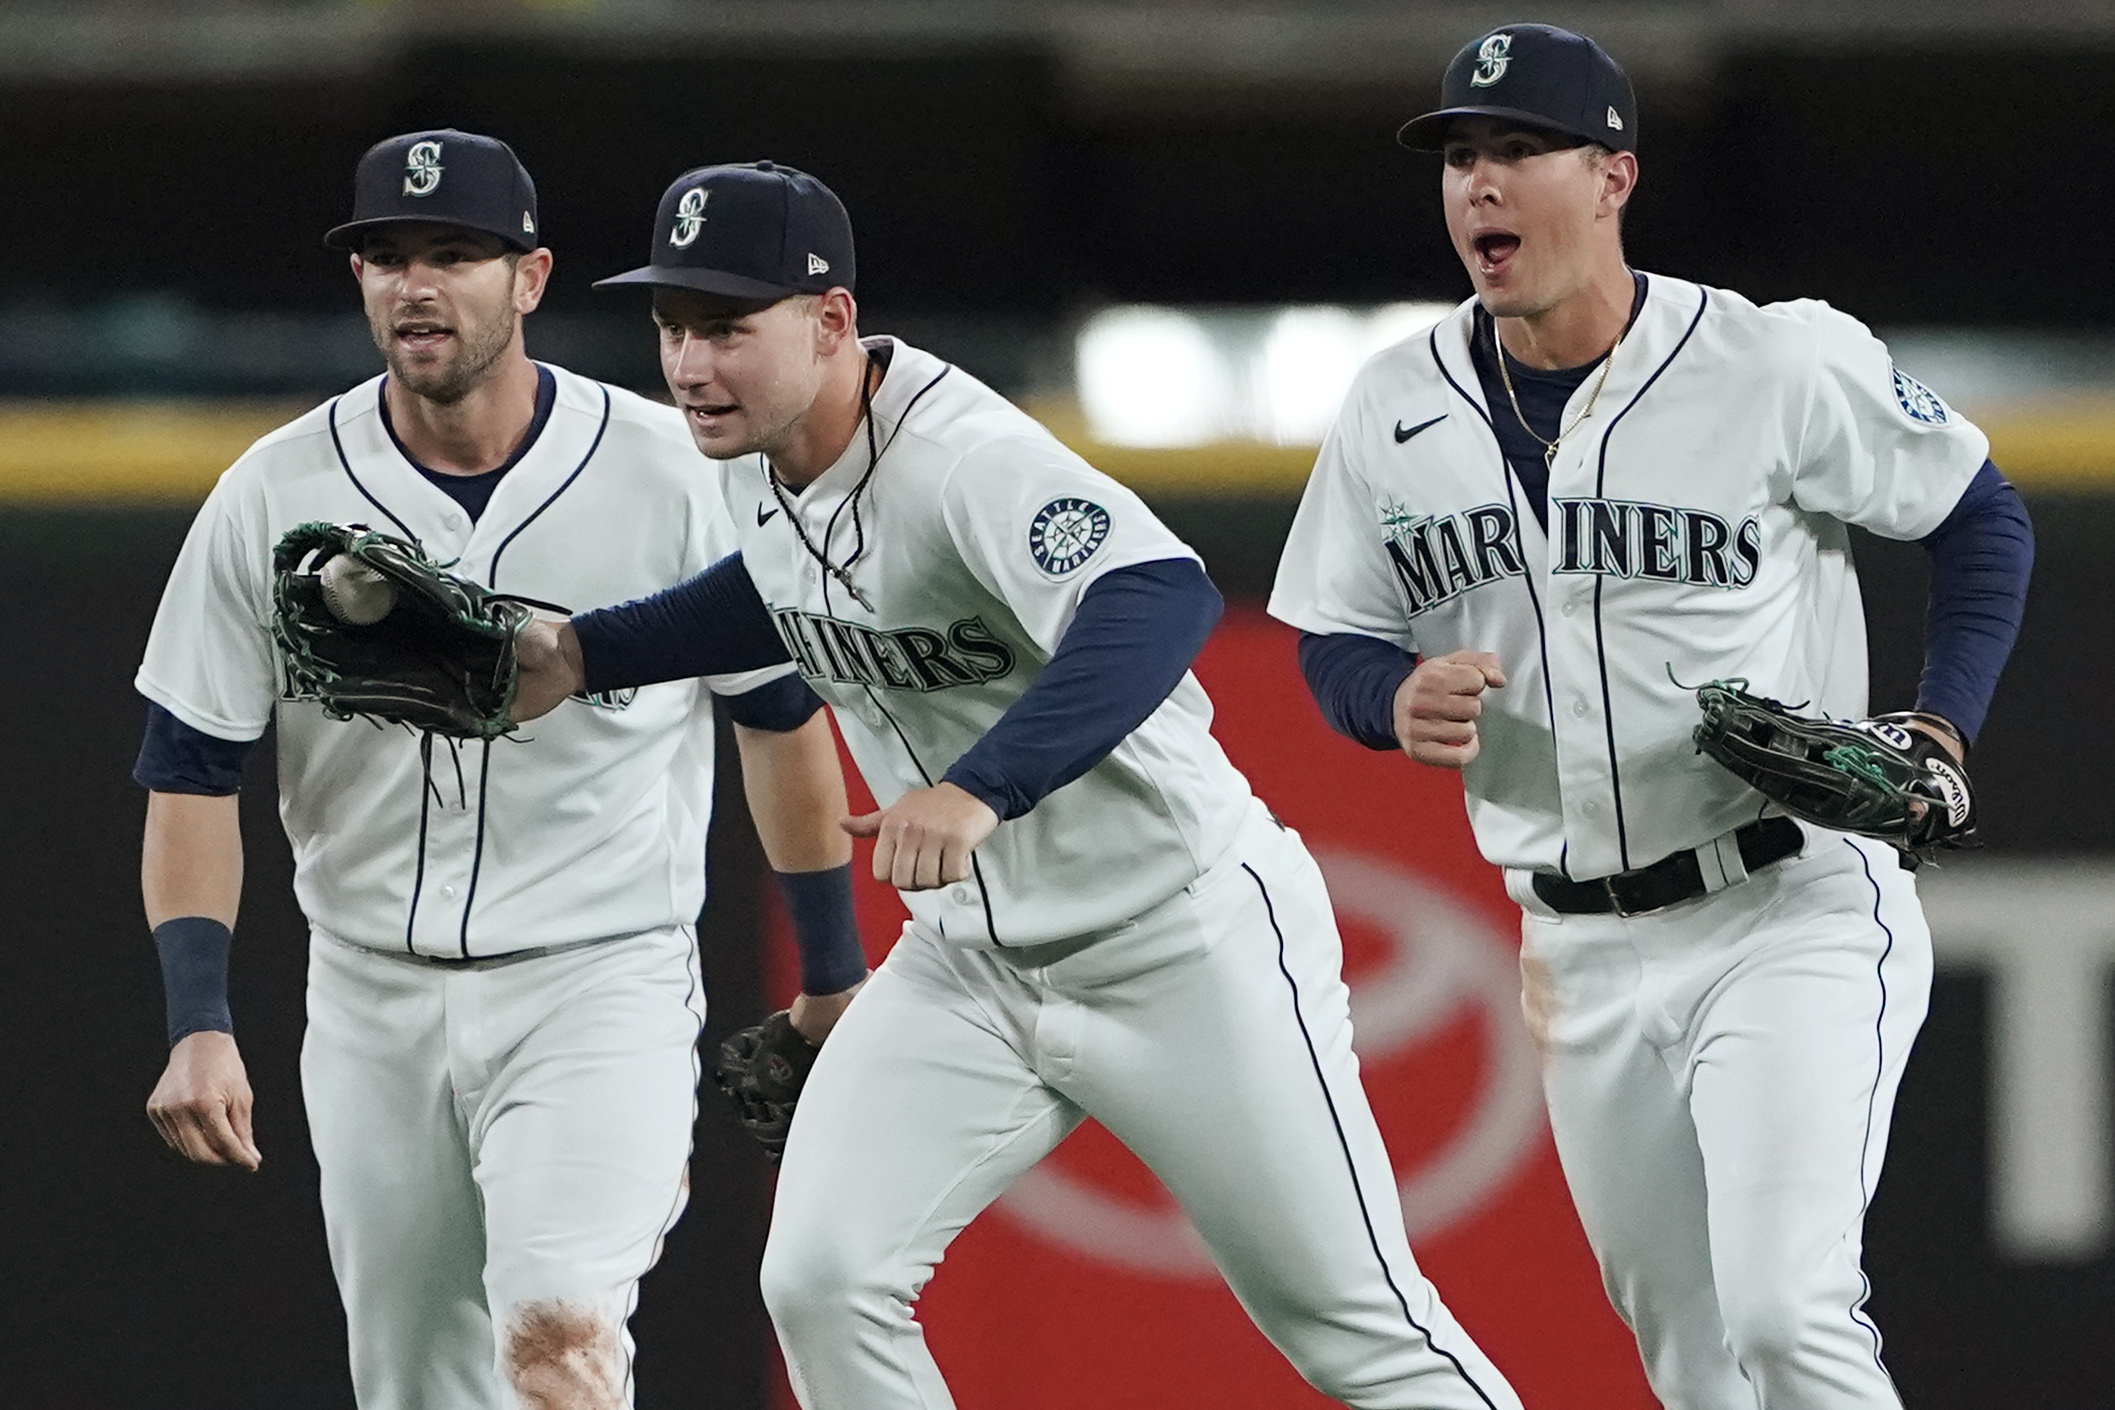 As if these Mariners could clinch a playoff berth with anything